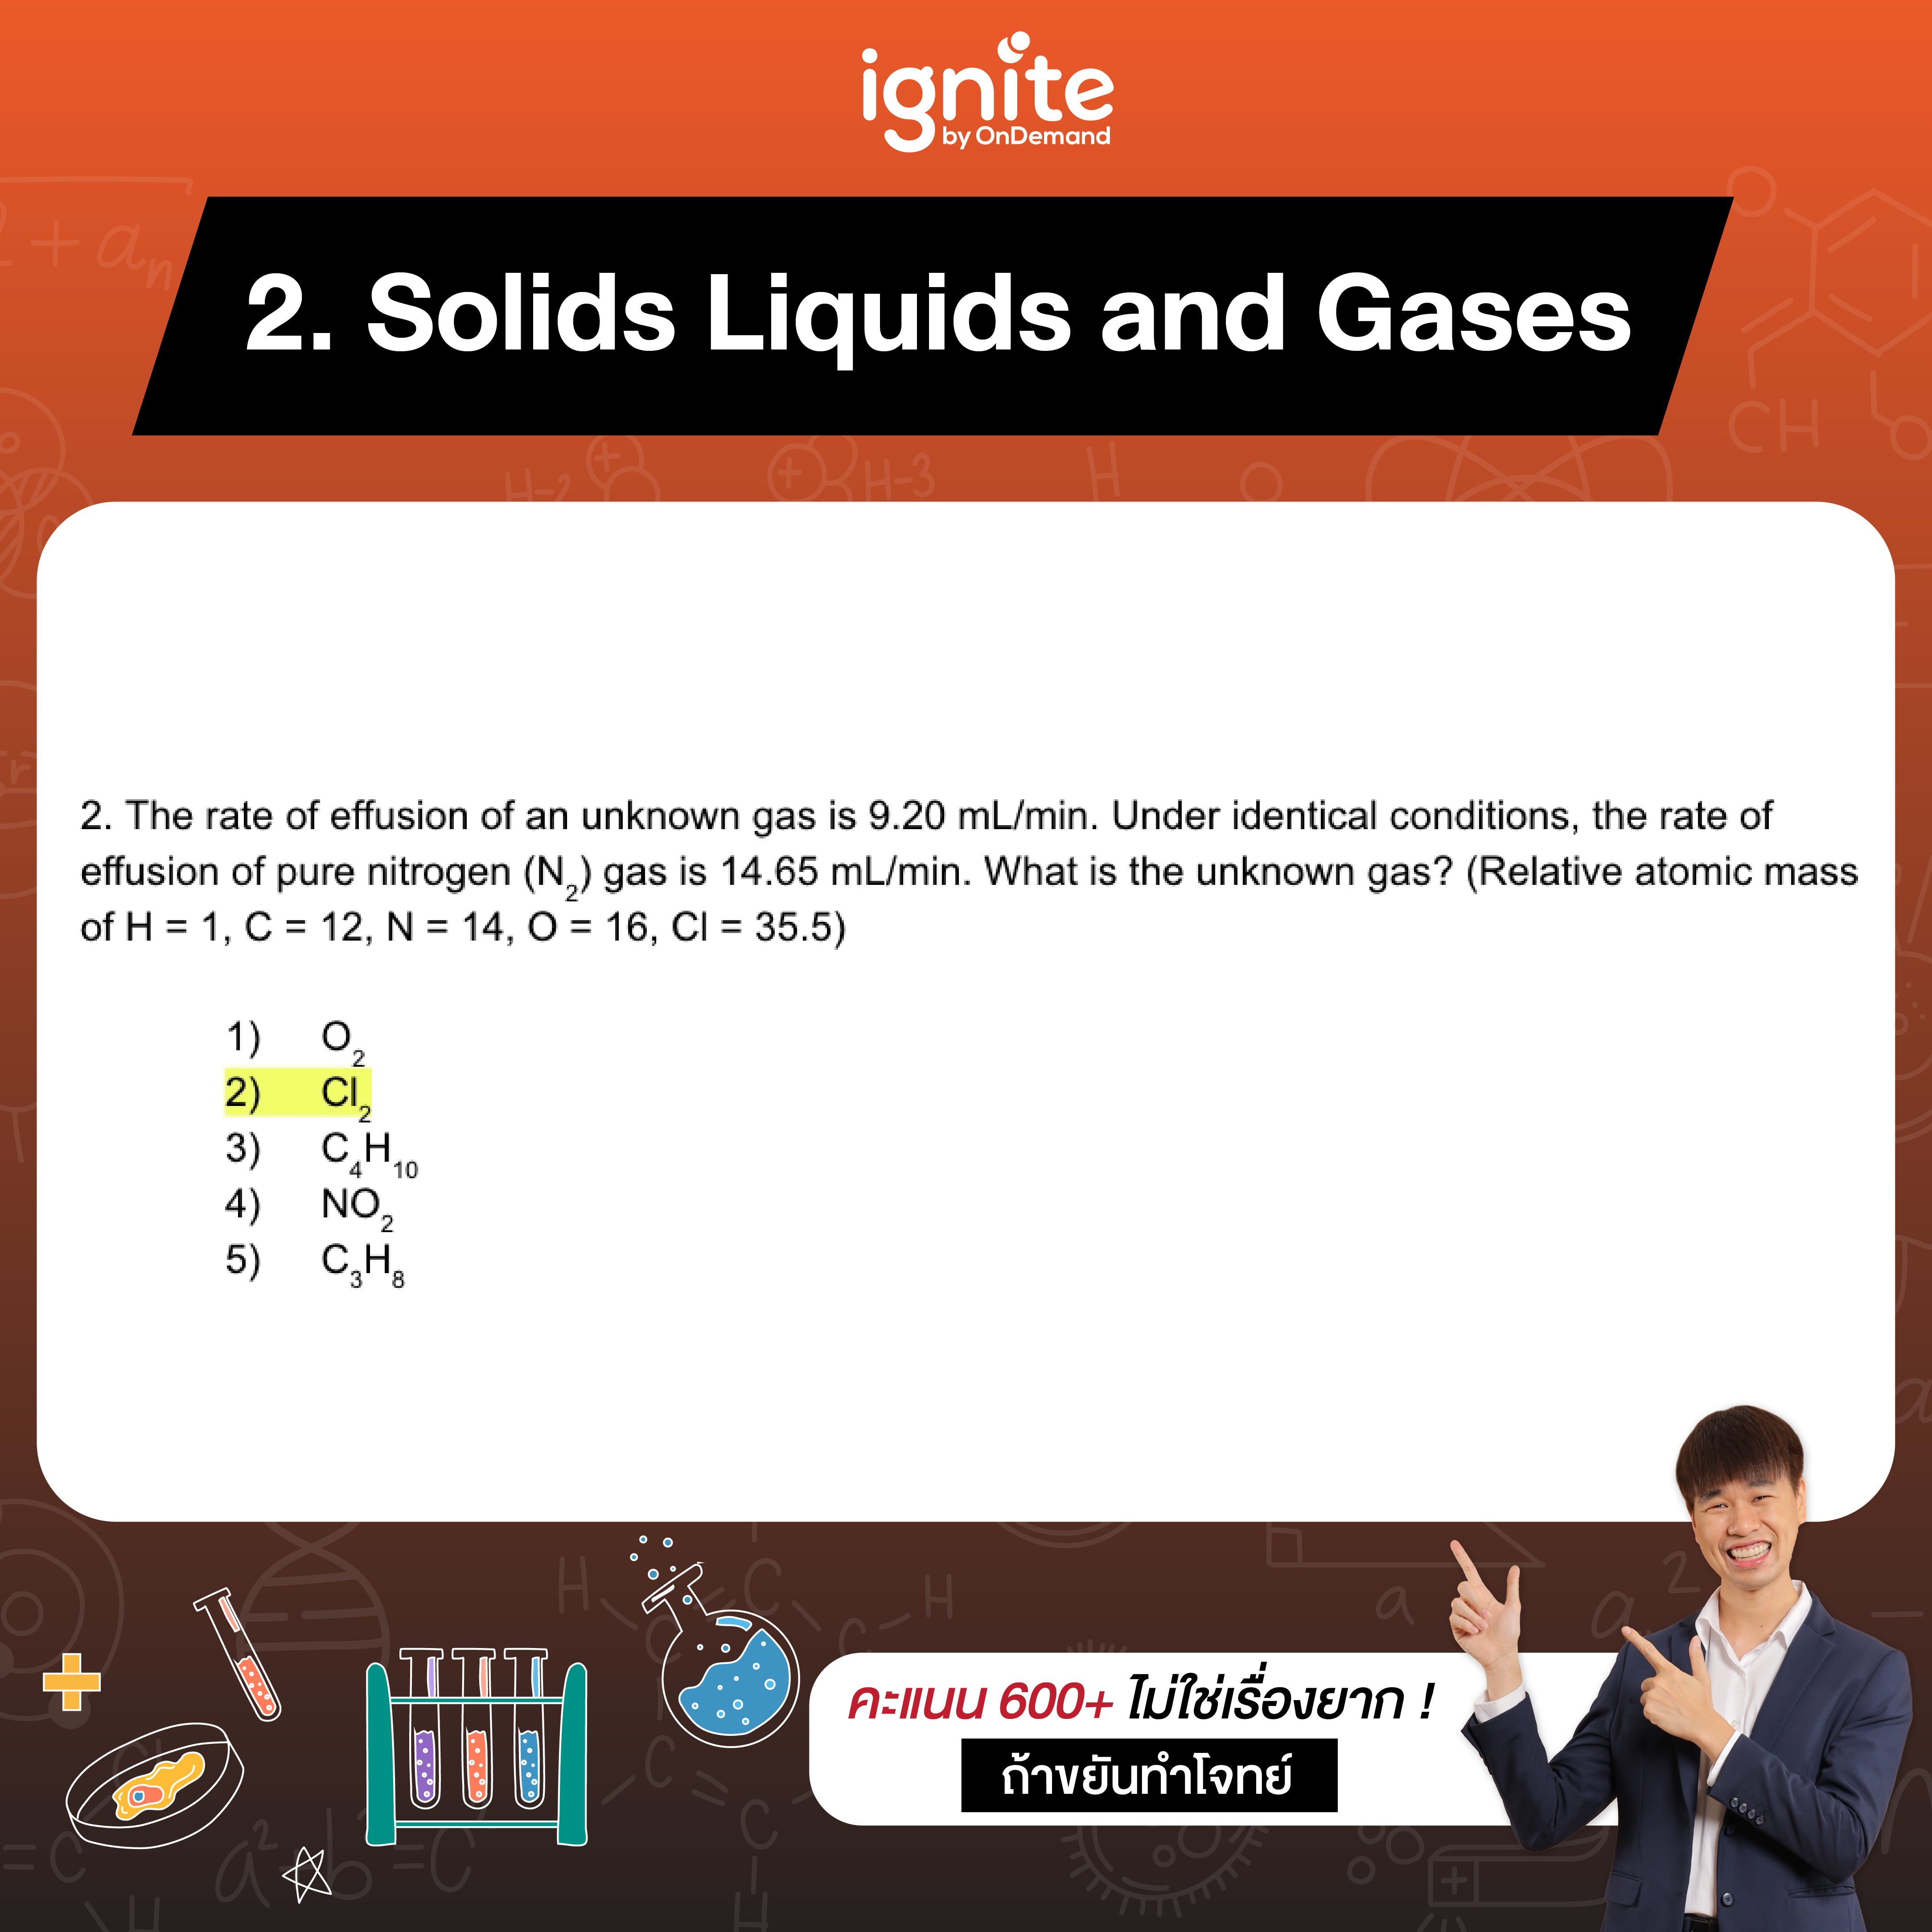 Solids Liquids and Gases CU-ATS - Chemistry - Jan 2023 - ignite by OnDemand